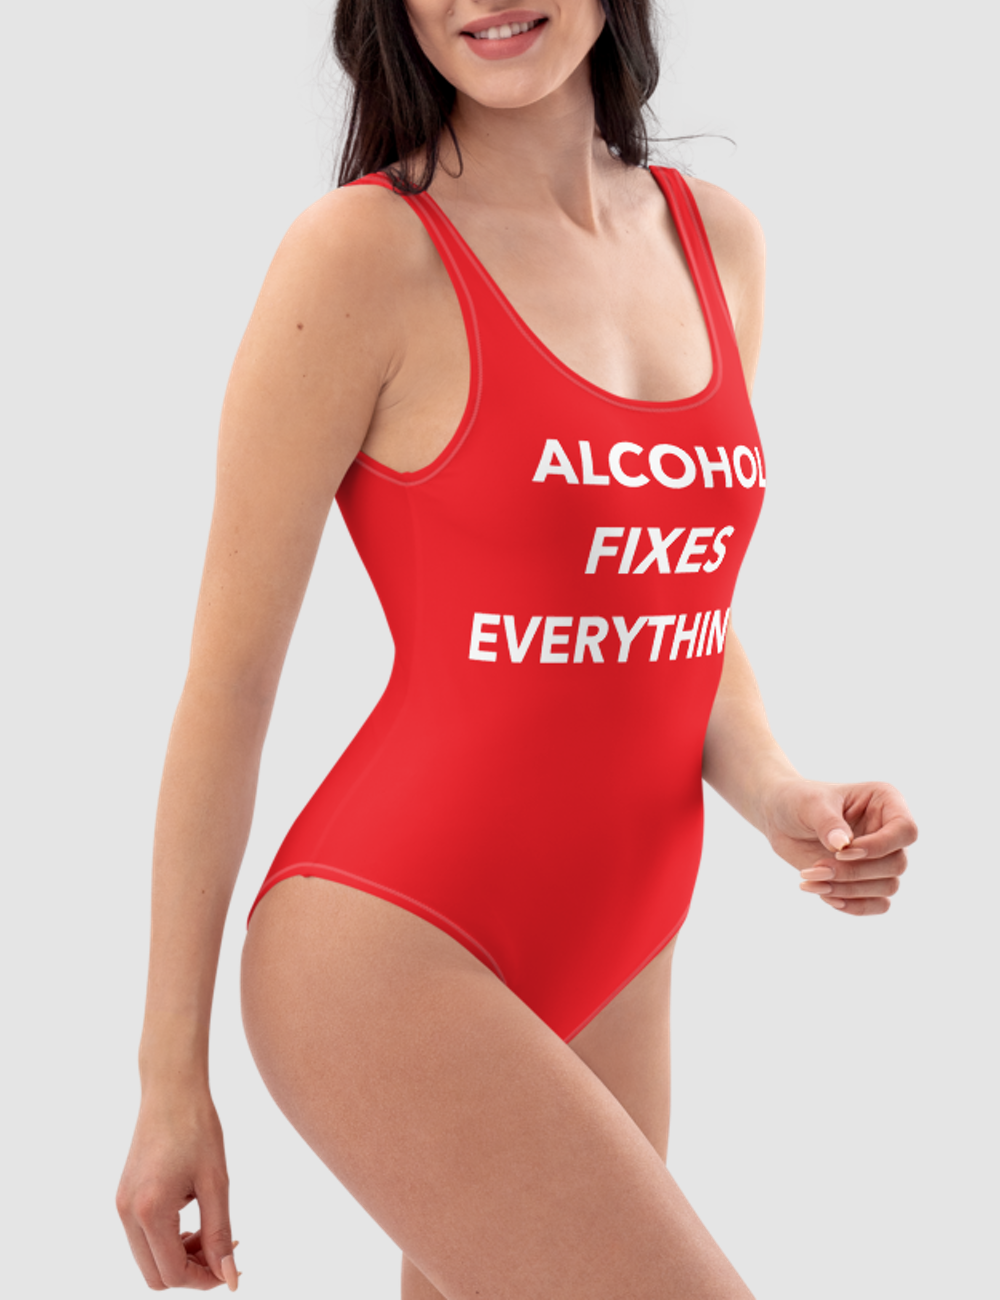 Alcohol Fixes Everything | Women's One-Piece Swimsuit OniTakai